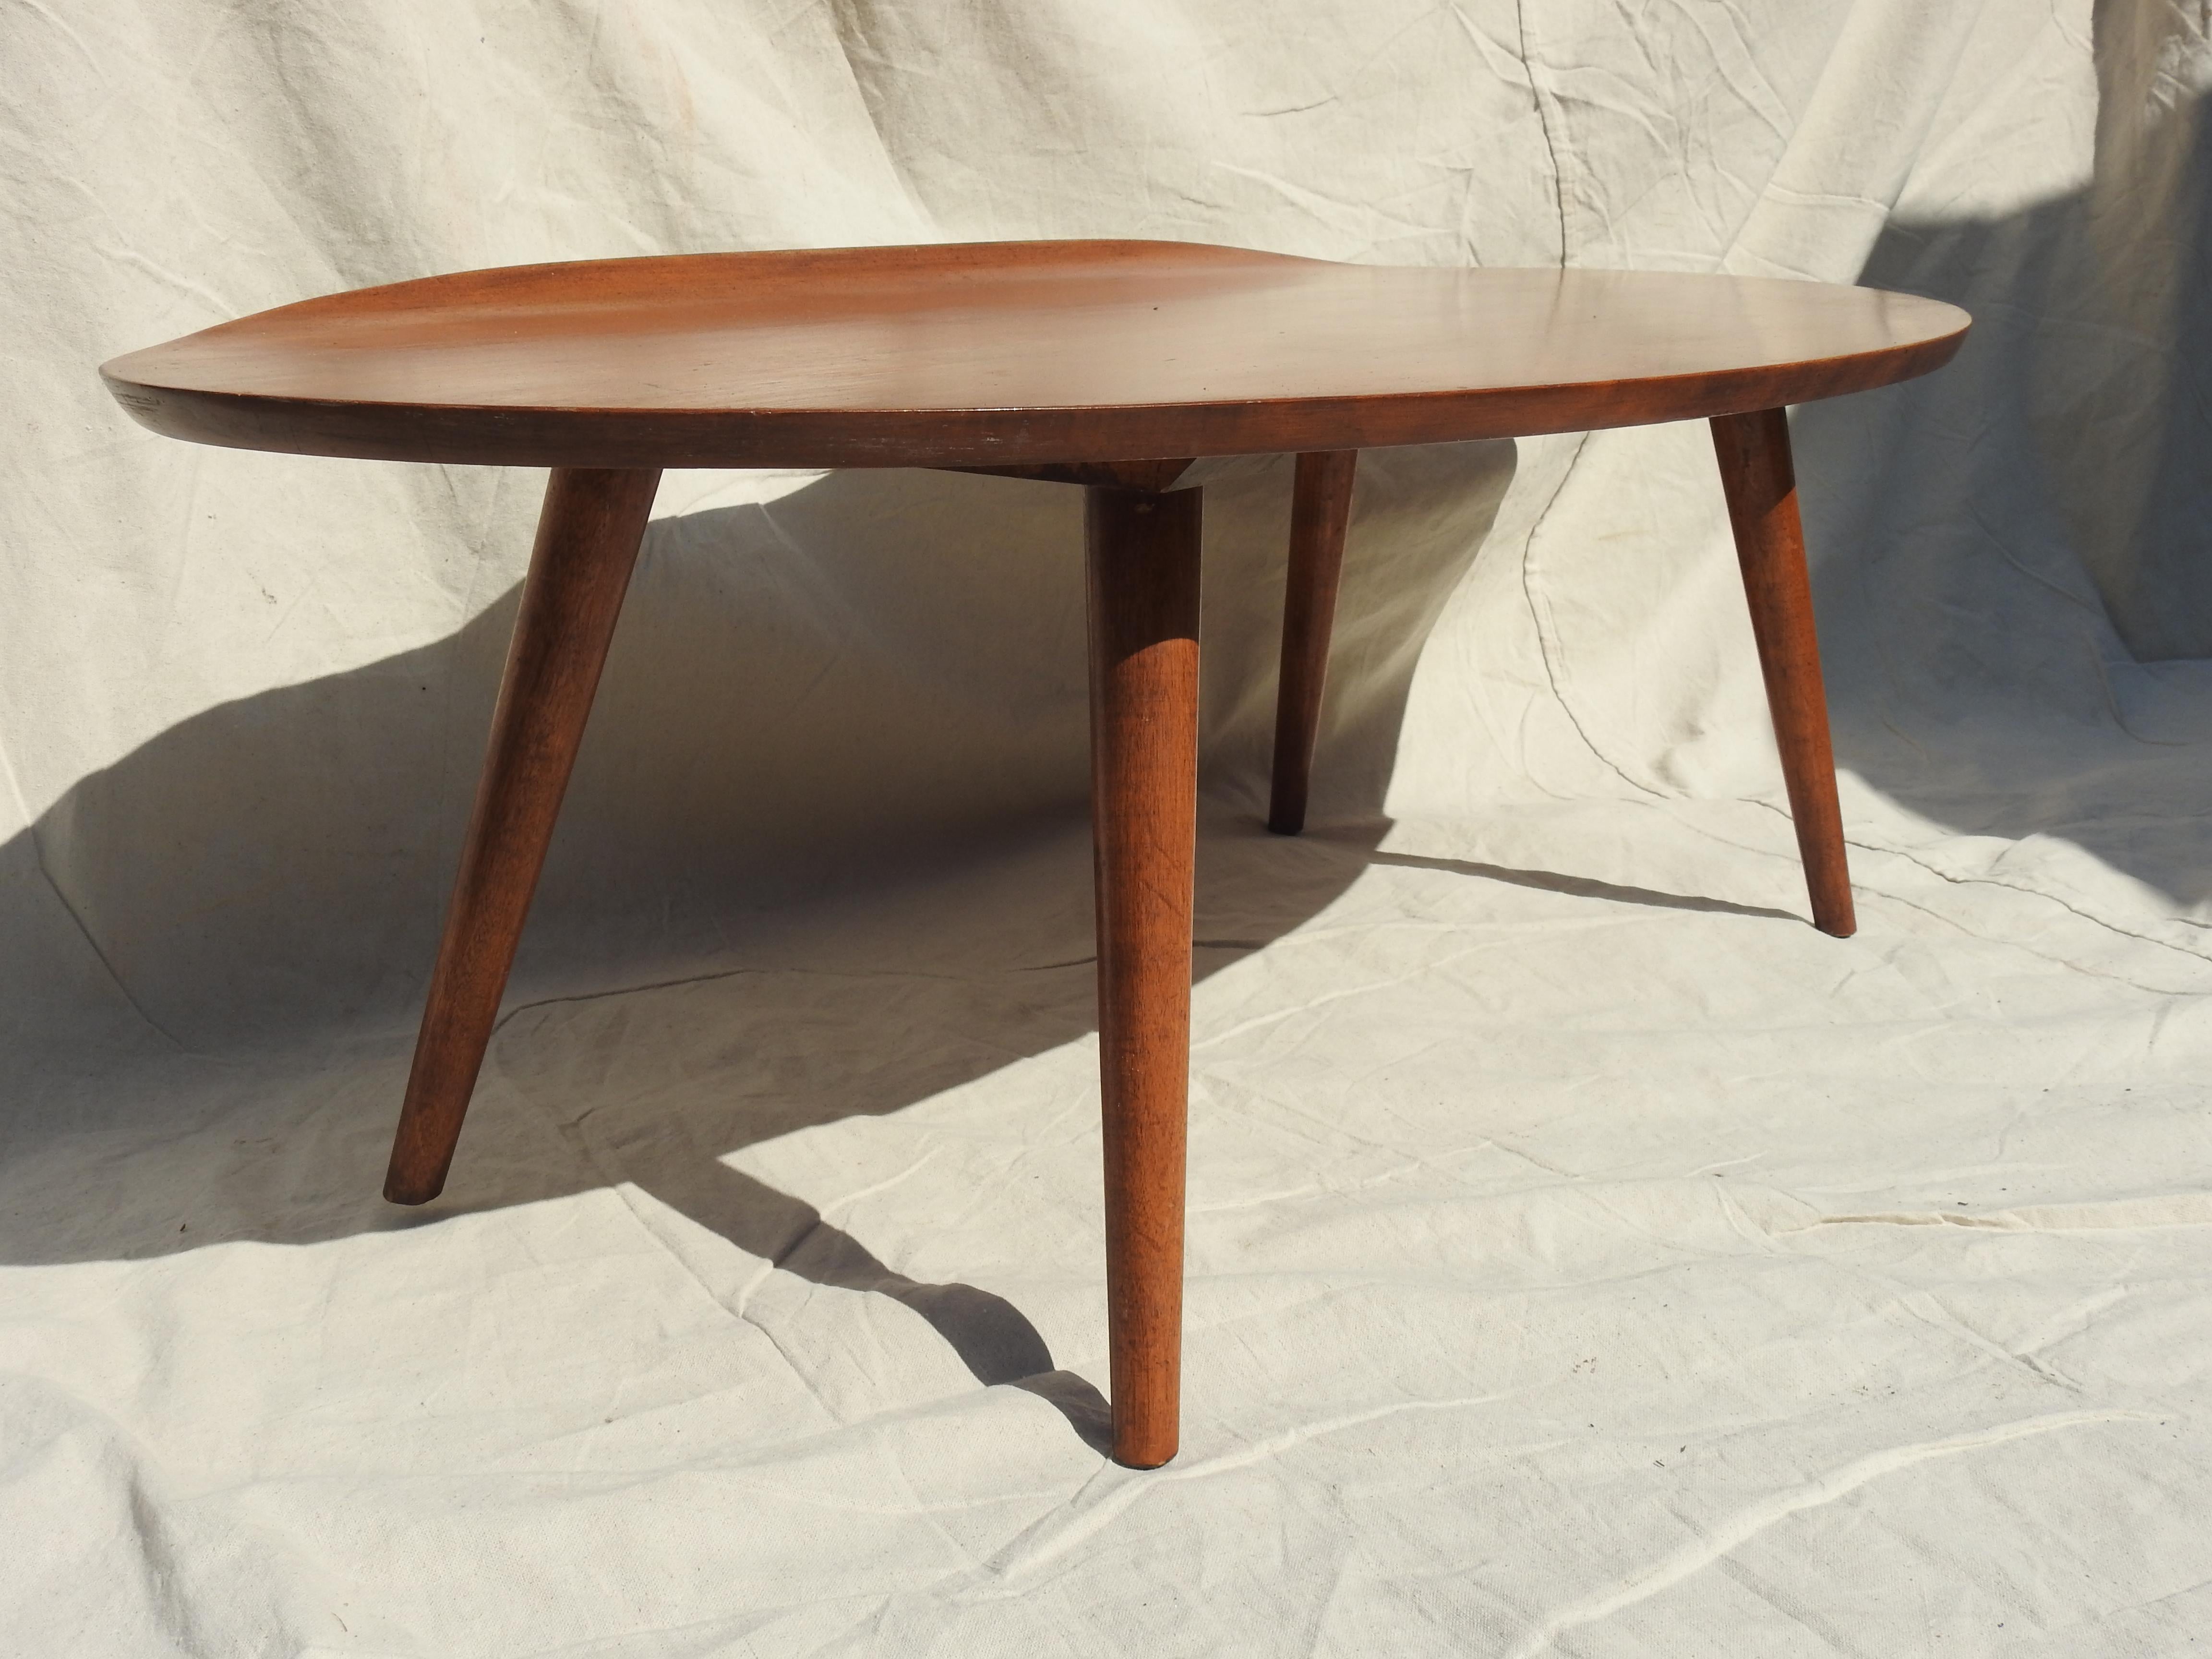 Gorgeous midcentury 1950s Russell Wright designed surfboard coffee or cocktail table with curved lip on one side. Beautiful warm toned walnut surfboard shape sitting on 4 tapered turned legs. Russell Wright Conant ball markings are on underside of